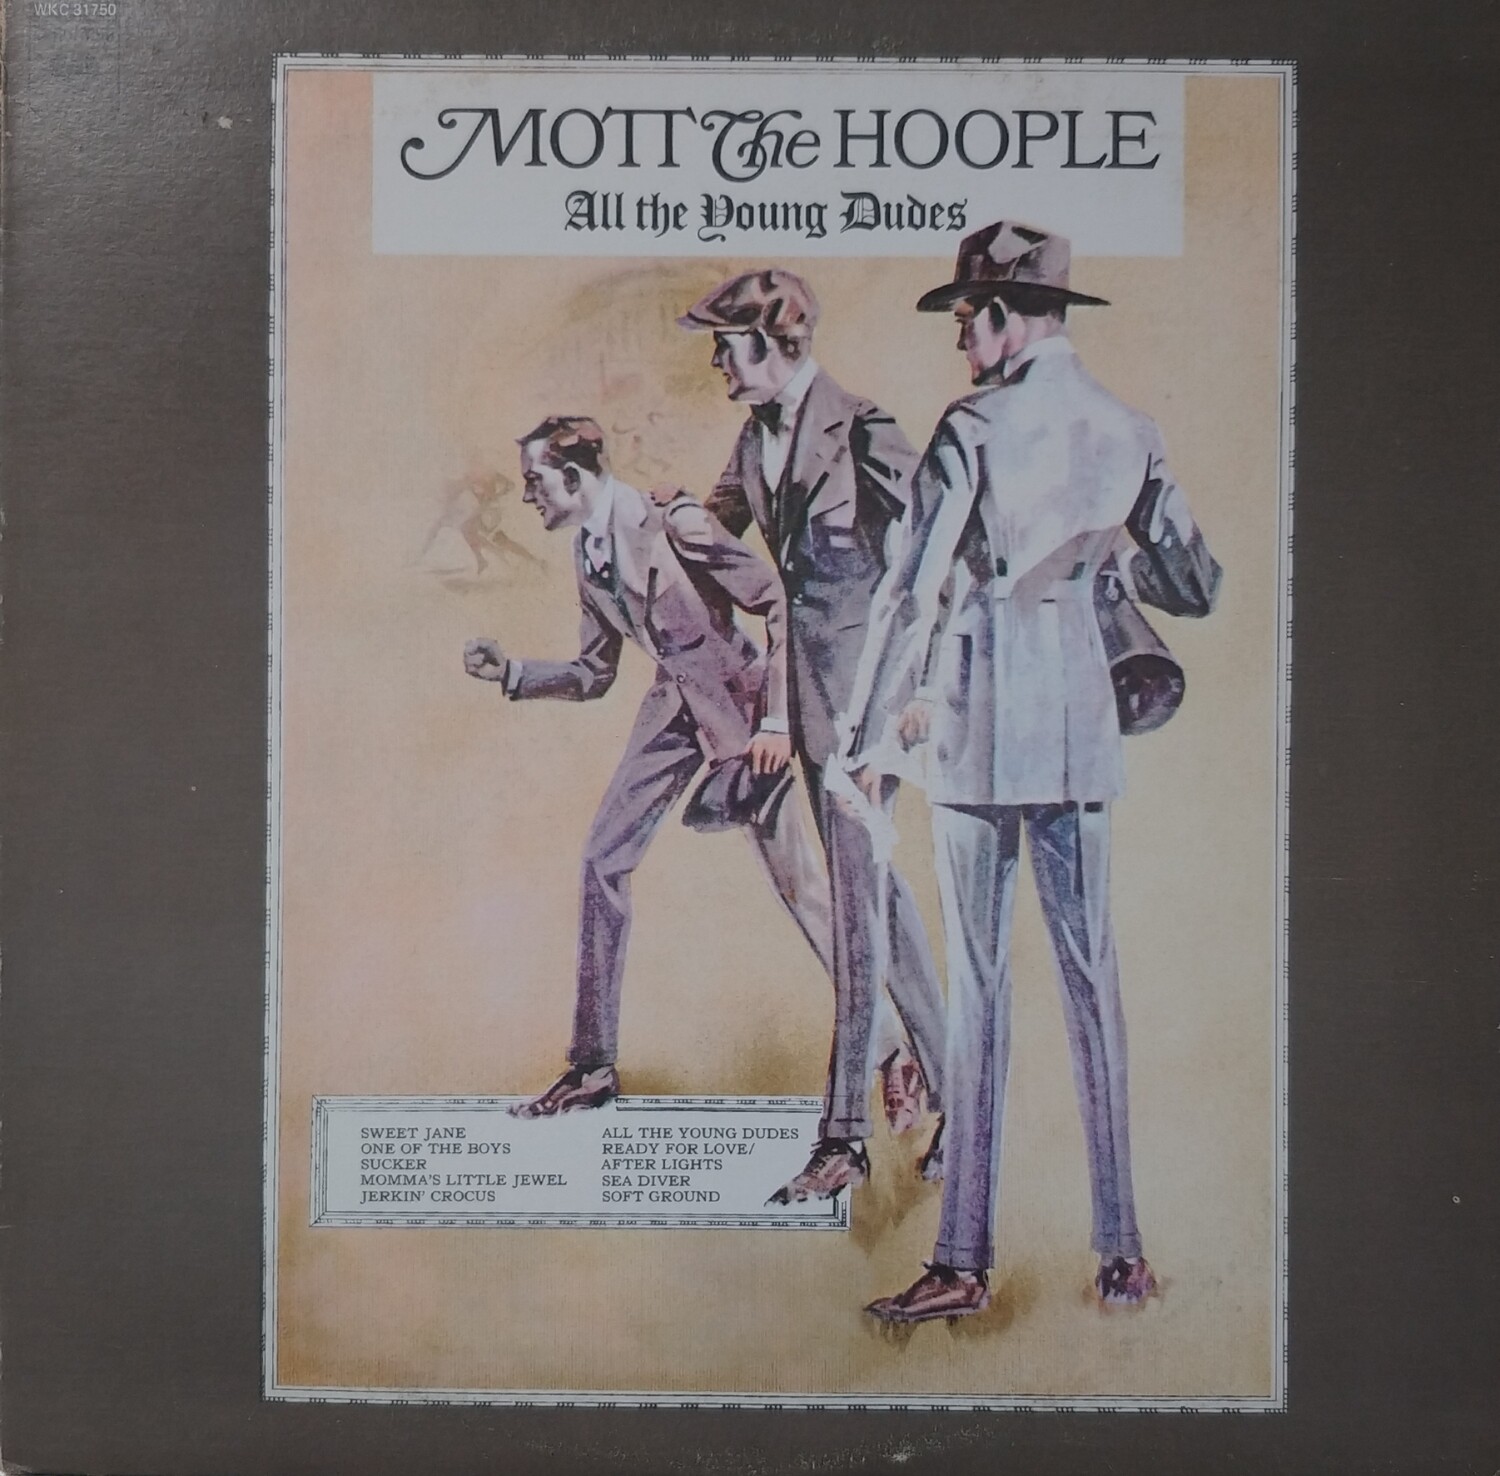 Mott The Hoople - All the Young dudes